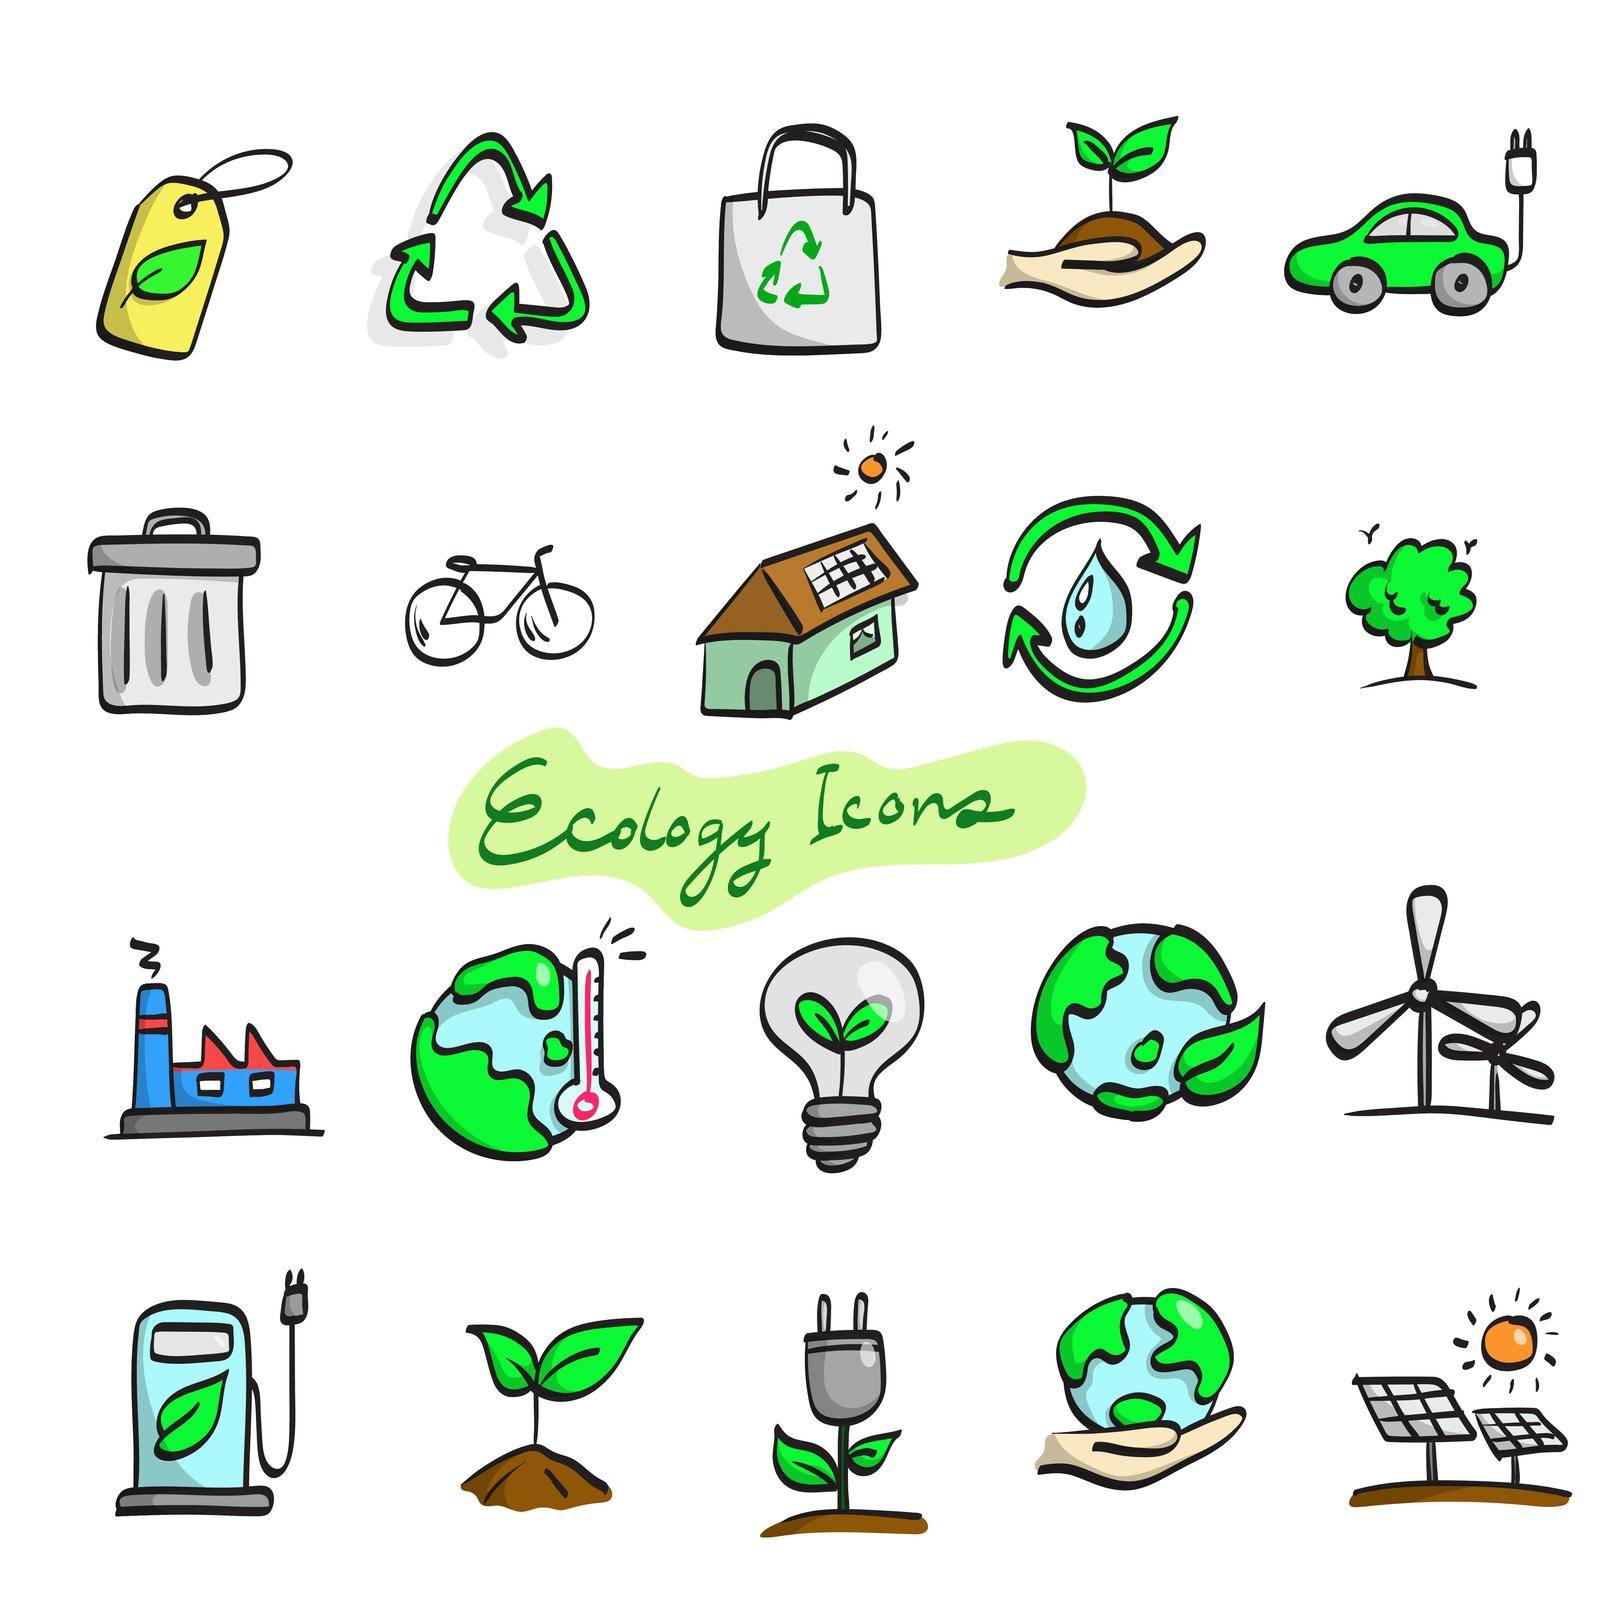 colorful ecology icon set illustration vector hand drawn isolated on white background  by tidarattj